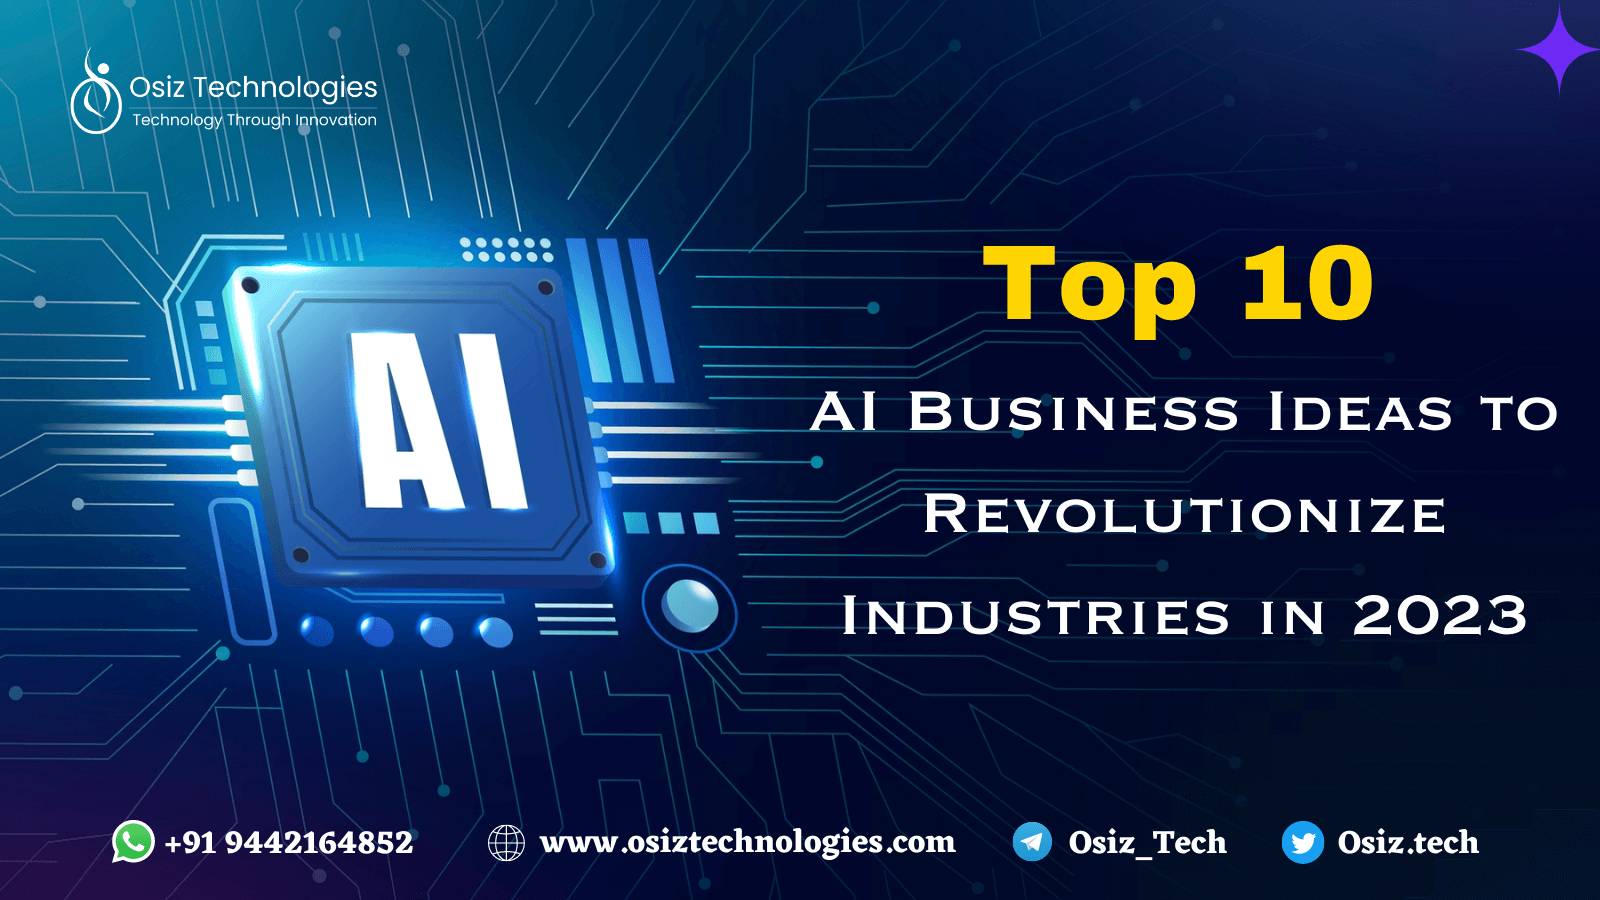 Top 10 AI Business Ideas to Revolutionize Industries  In 2023